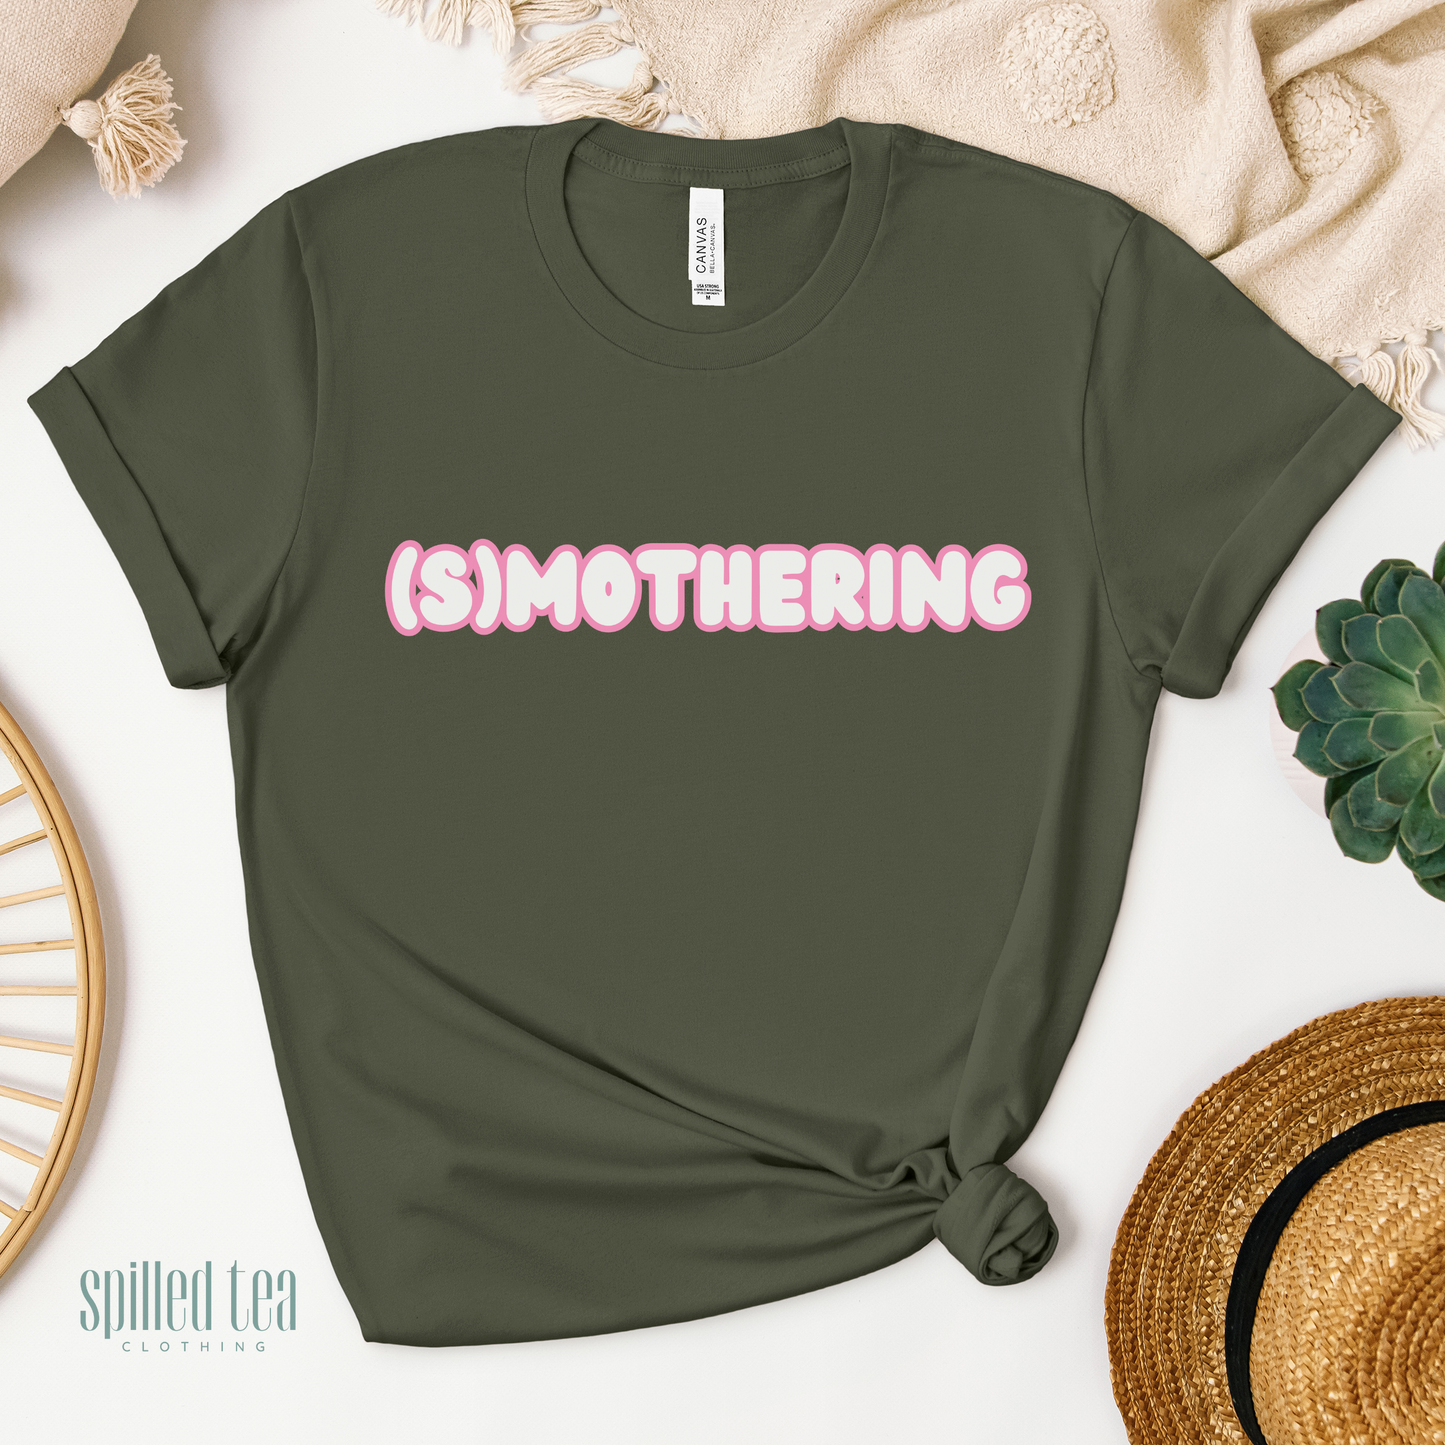 Smothering T-Shirt